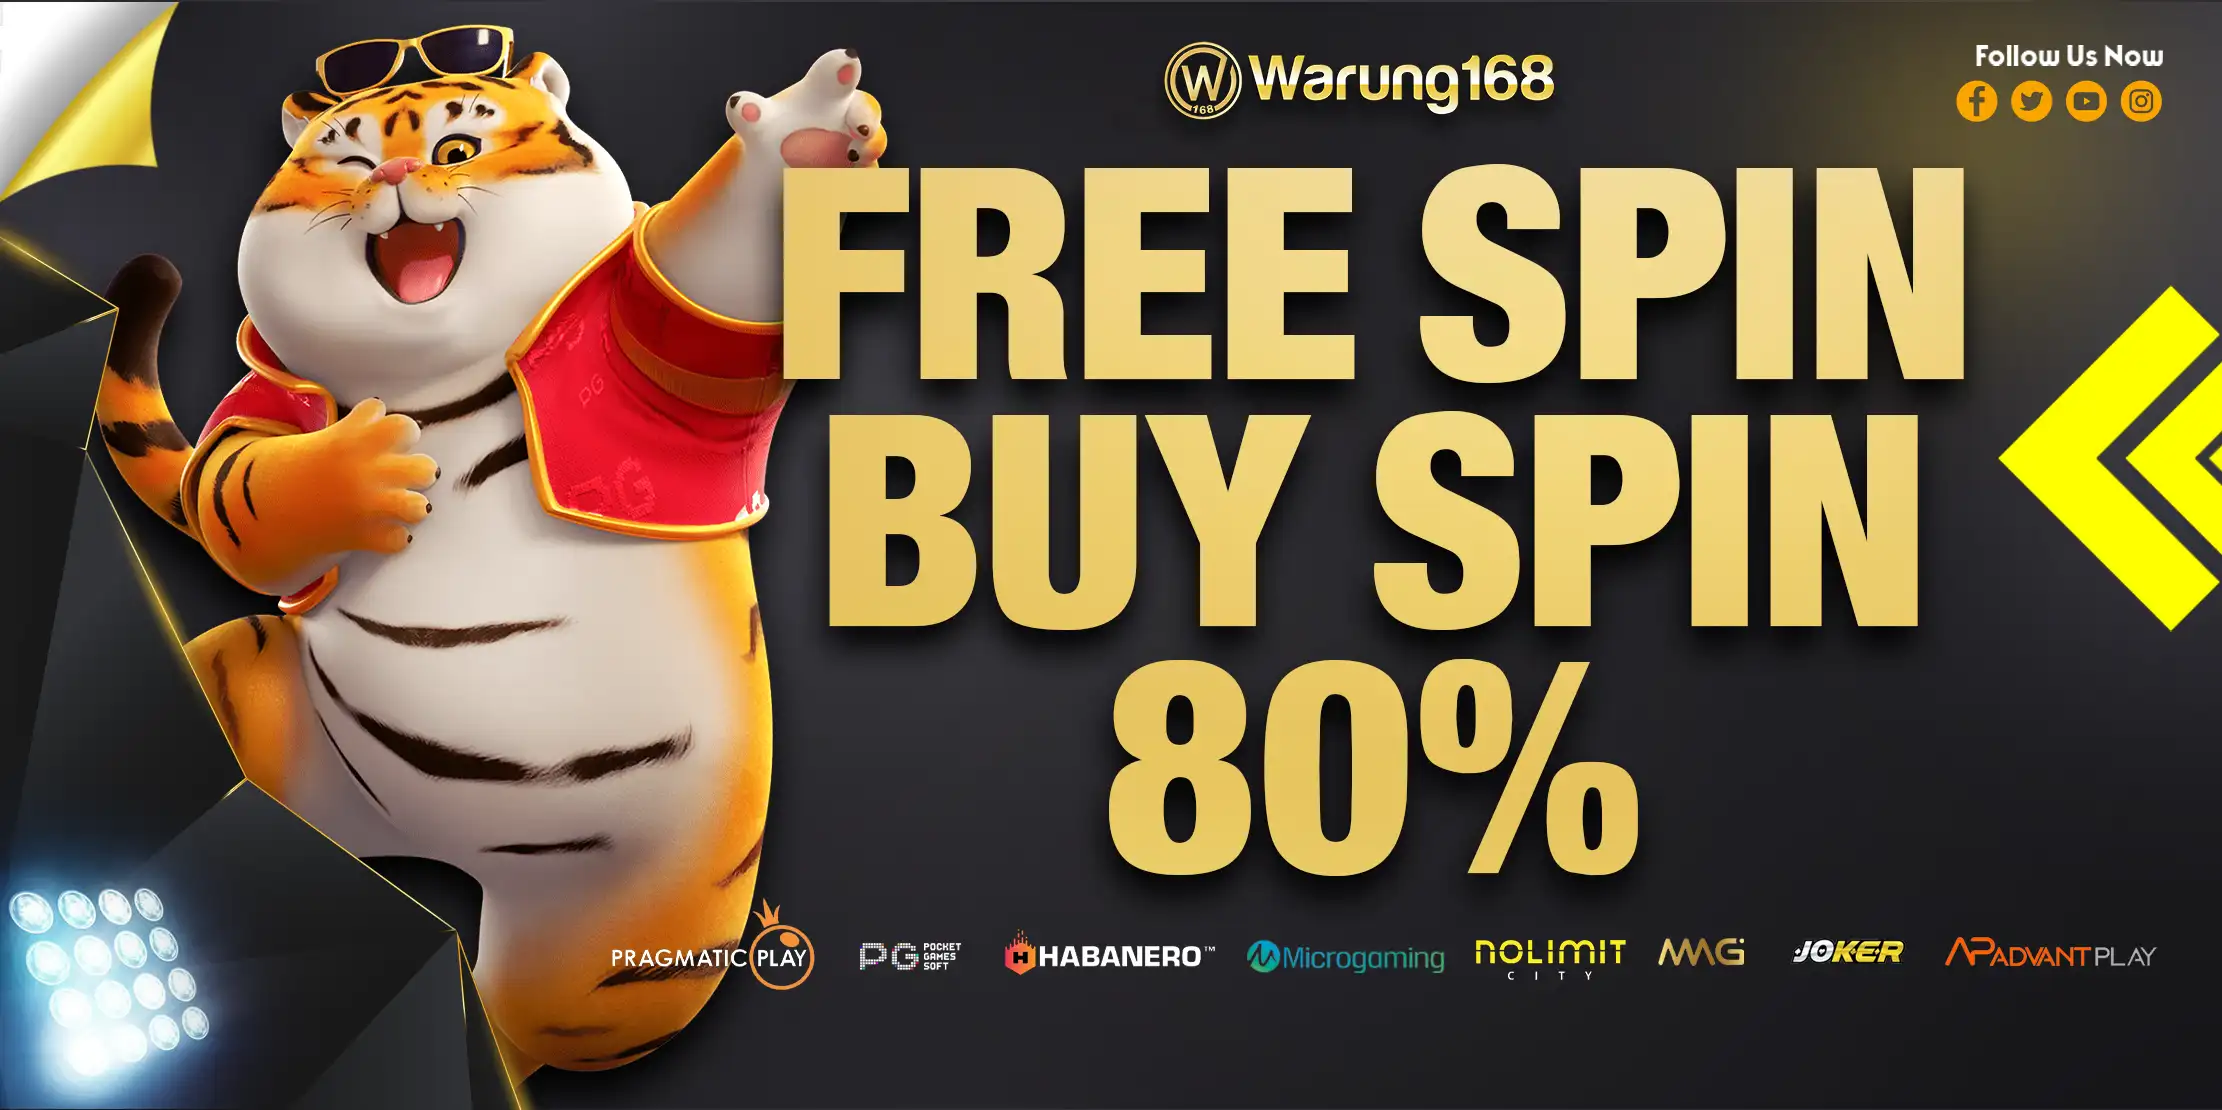 FREE SPIN BUY SPIN